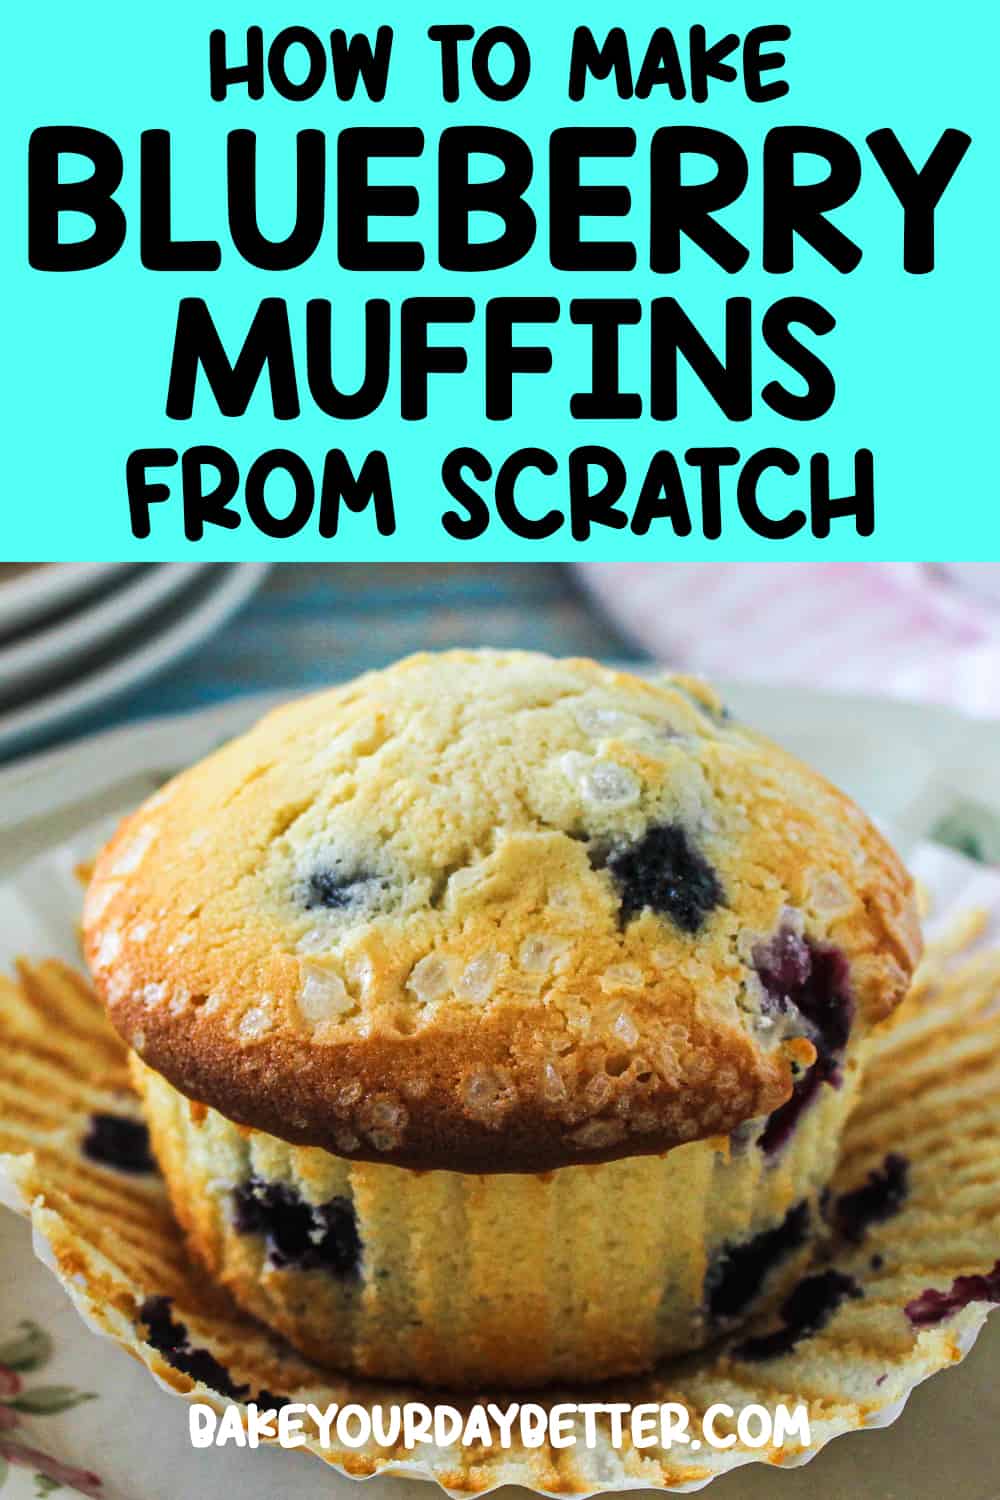 blueberry muffin with text overlay that says "how to make blueberry muffins from scratch"